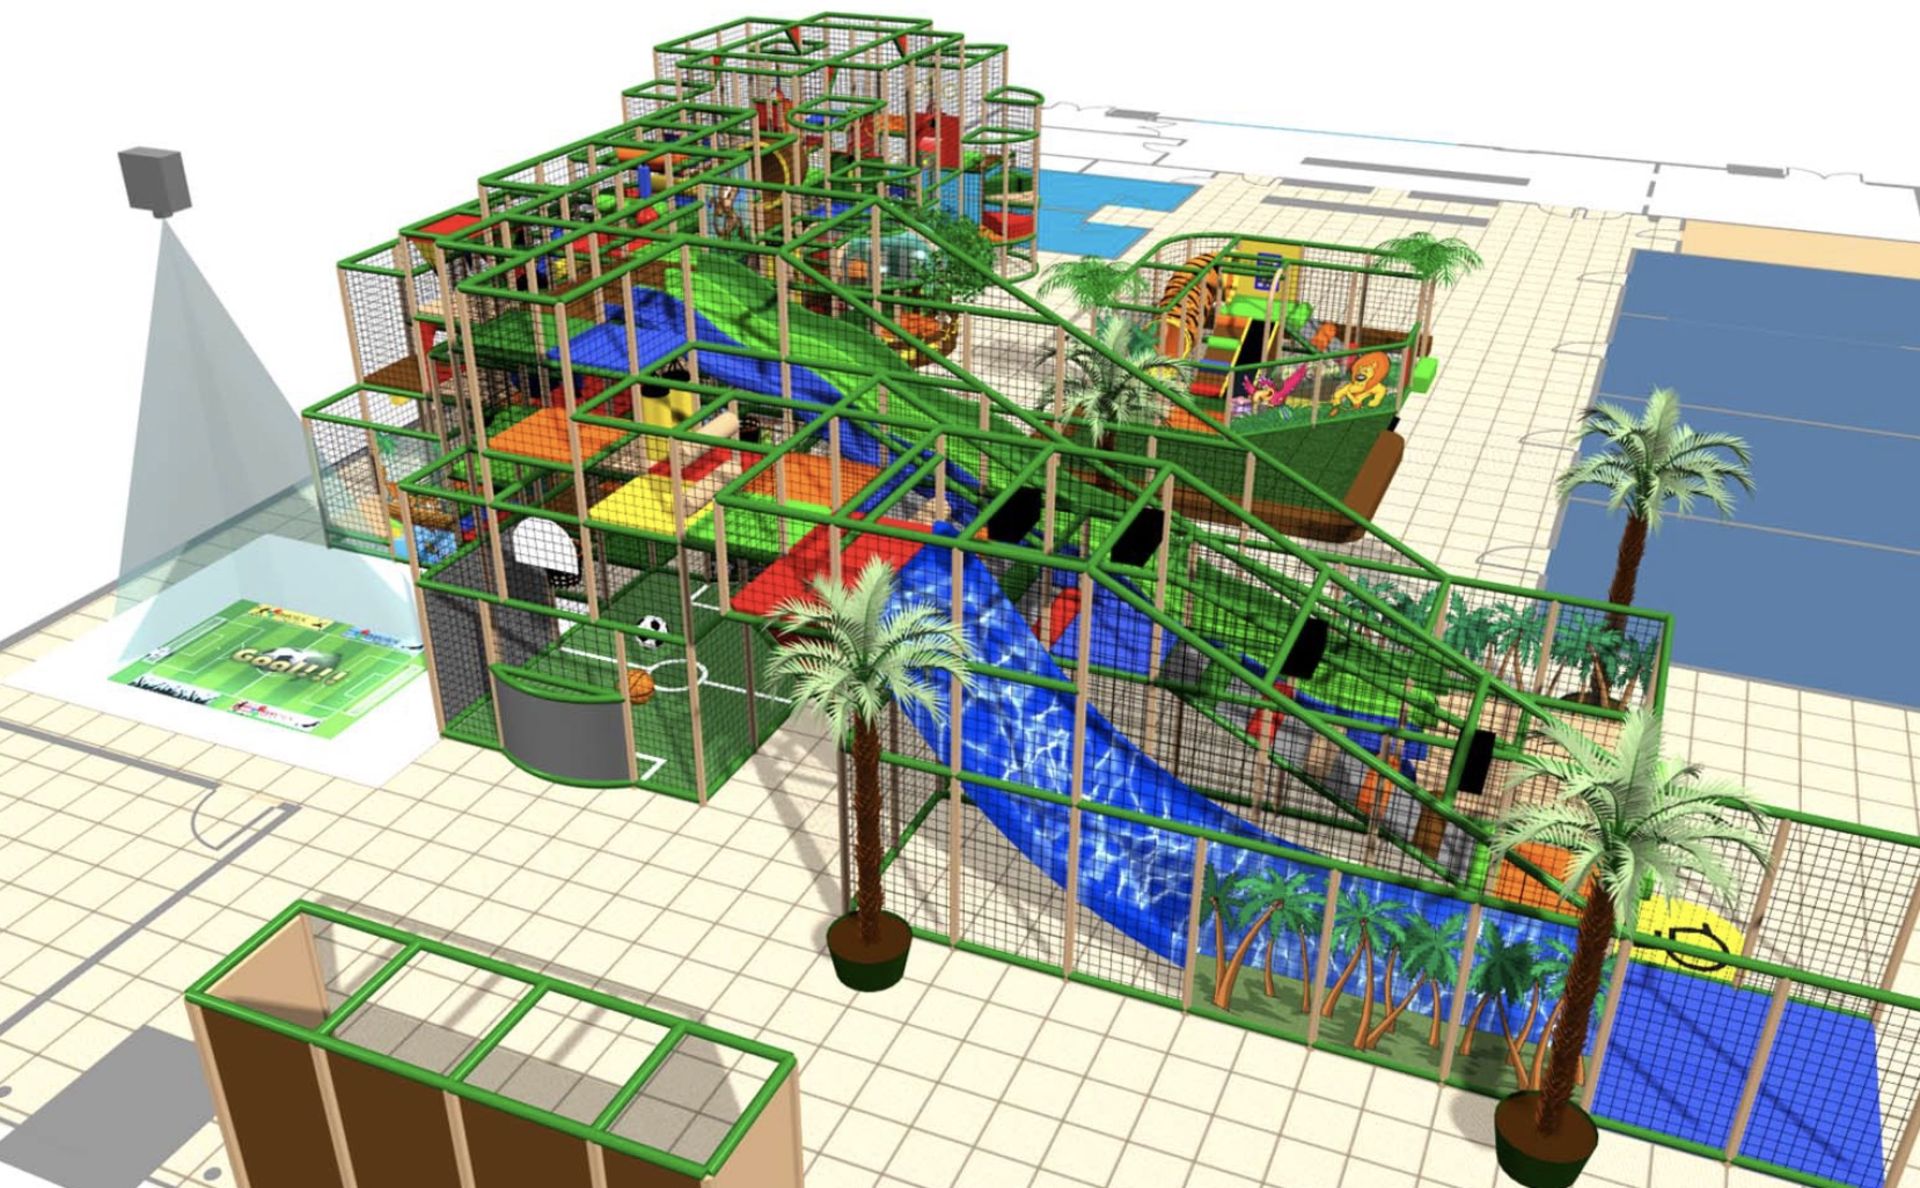 ONE INTERNATIONAL PLAY COMPANY LARGE INDOOR PLAYGROUND W/20FT HIGH SLIDES W/THREE WAVE SLIDE - Image 5 of 13